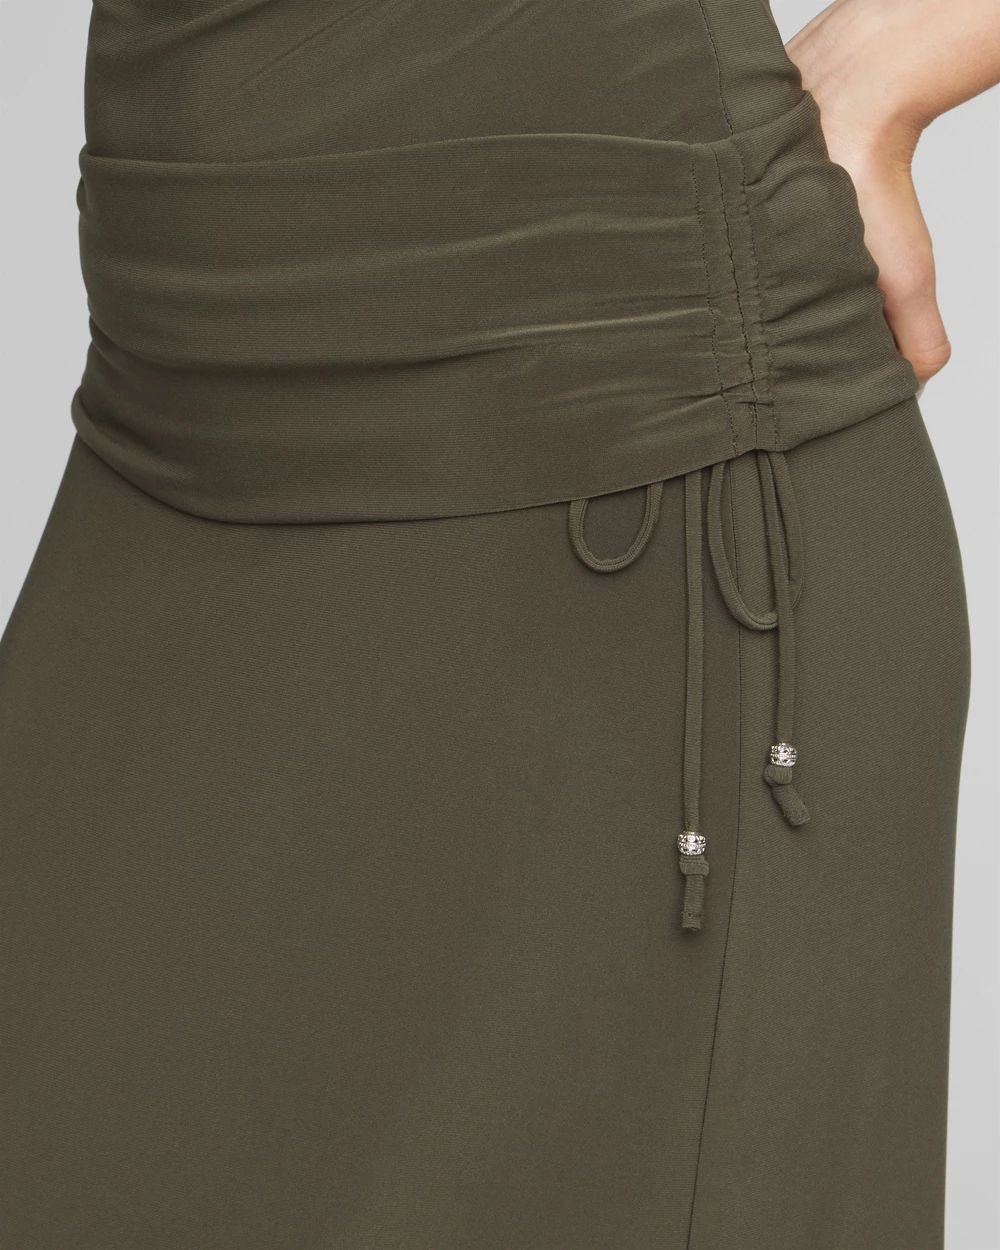 Matte Jersey Convertible Maxi Skirt click to view larger image.